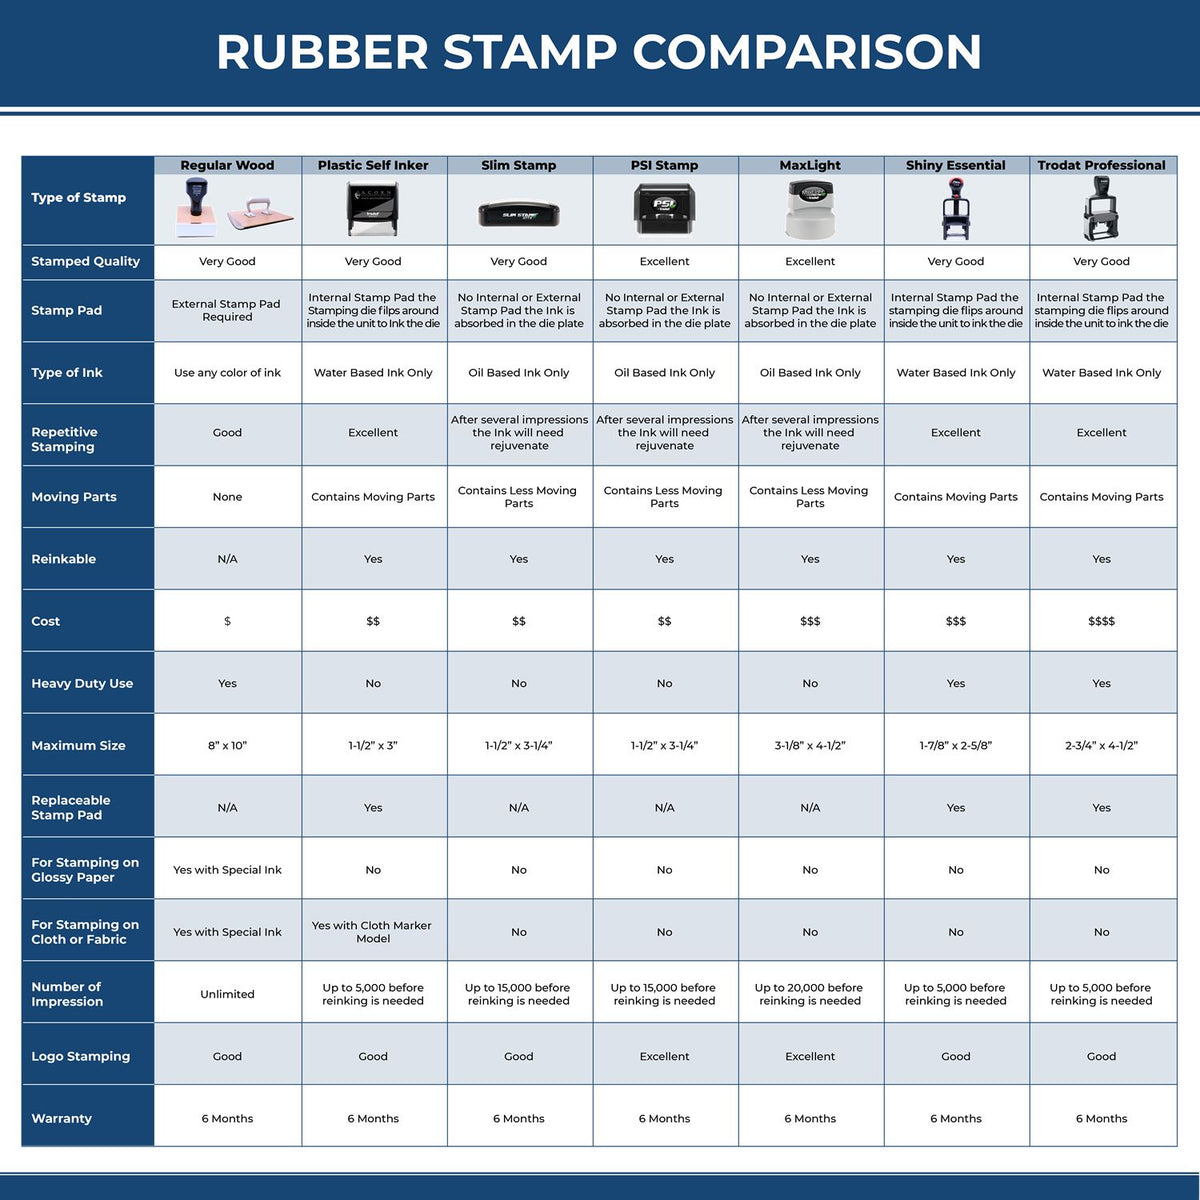 Large Standard Mail A Rubber Stamp 5580R Rubber Stamp Comparison